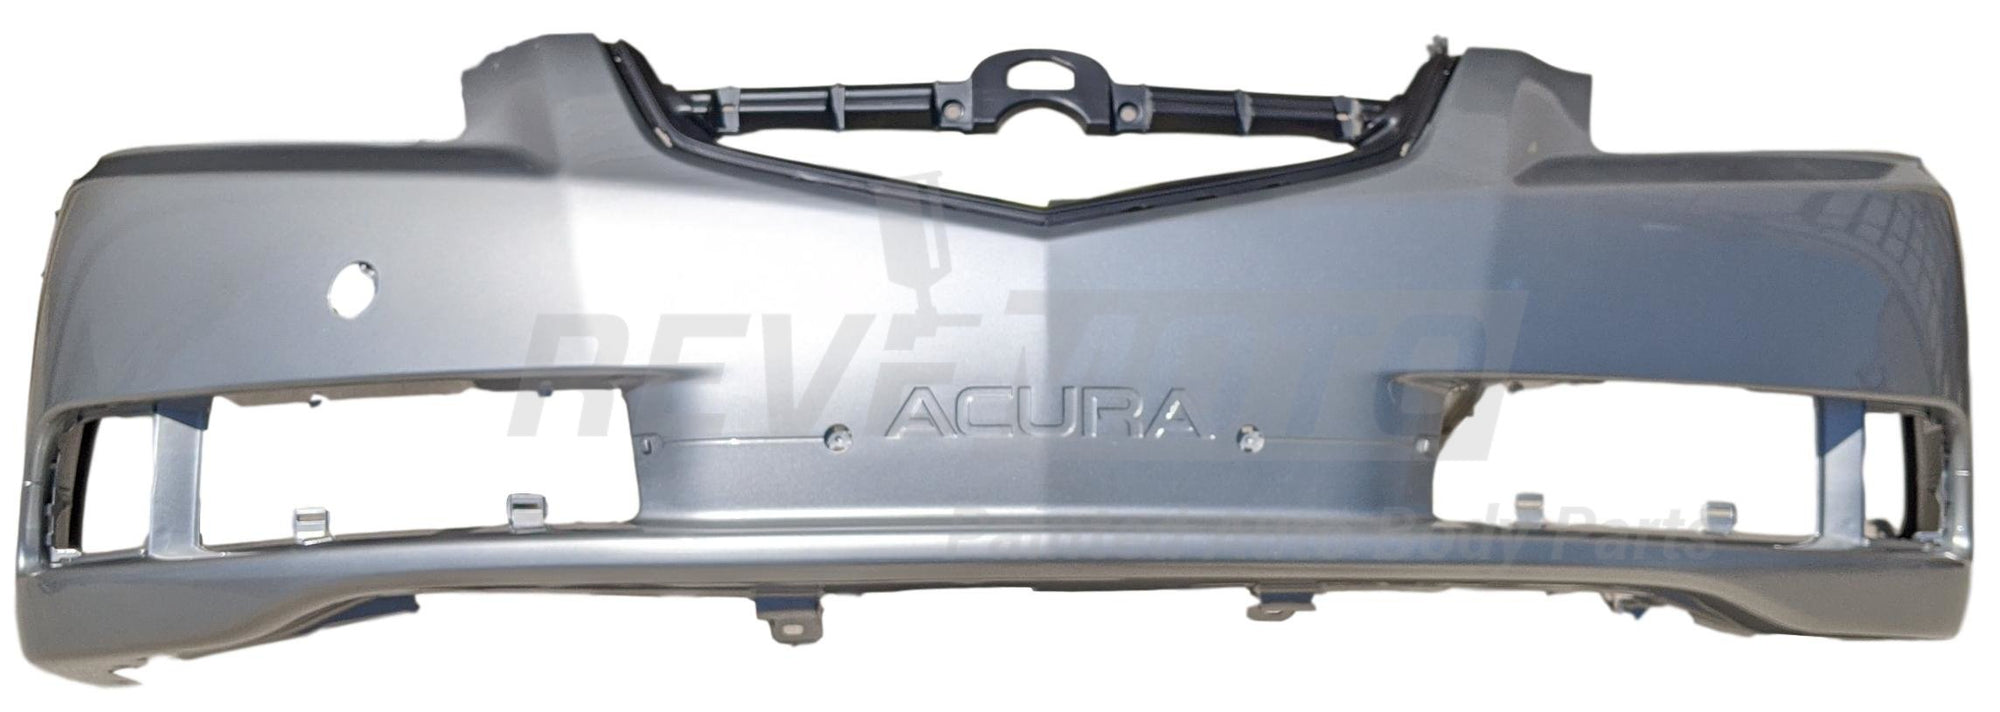 2008 Acura TL : Front Bumper Painted (Type S)